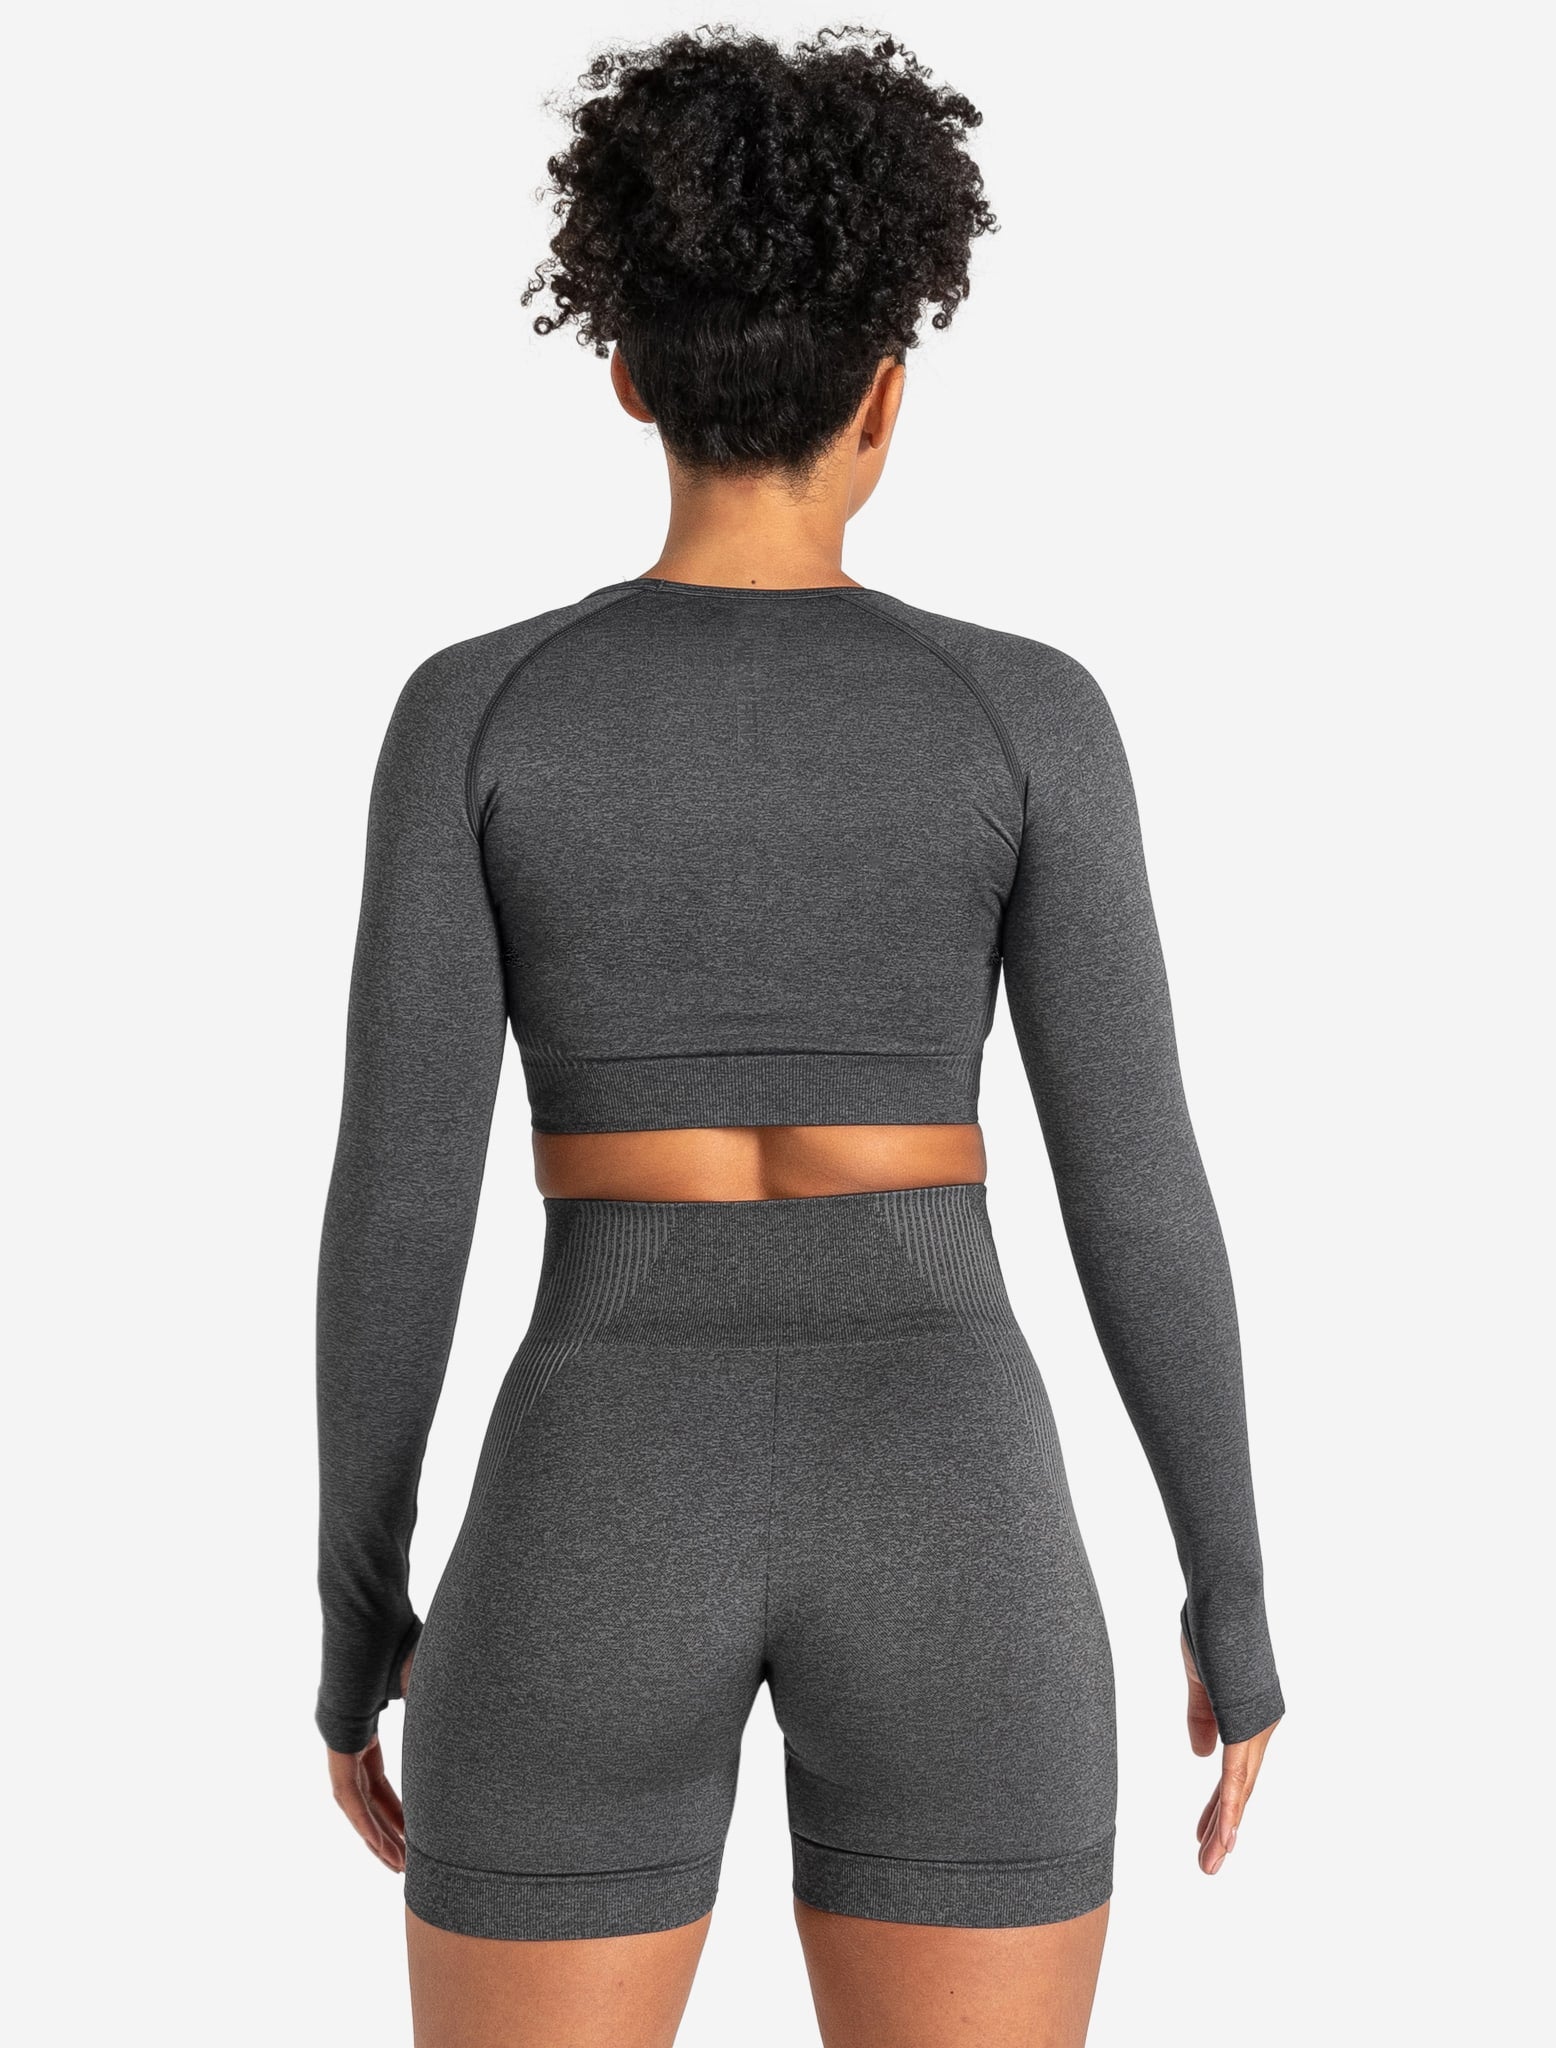 ADAPT 2.0 Seamless Crop Top - Charcoal Pursue Fitness 2